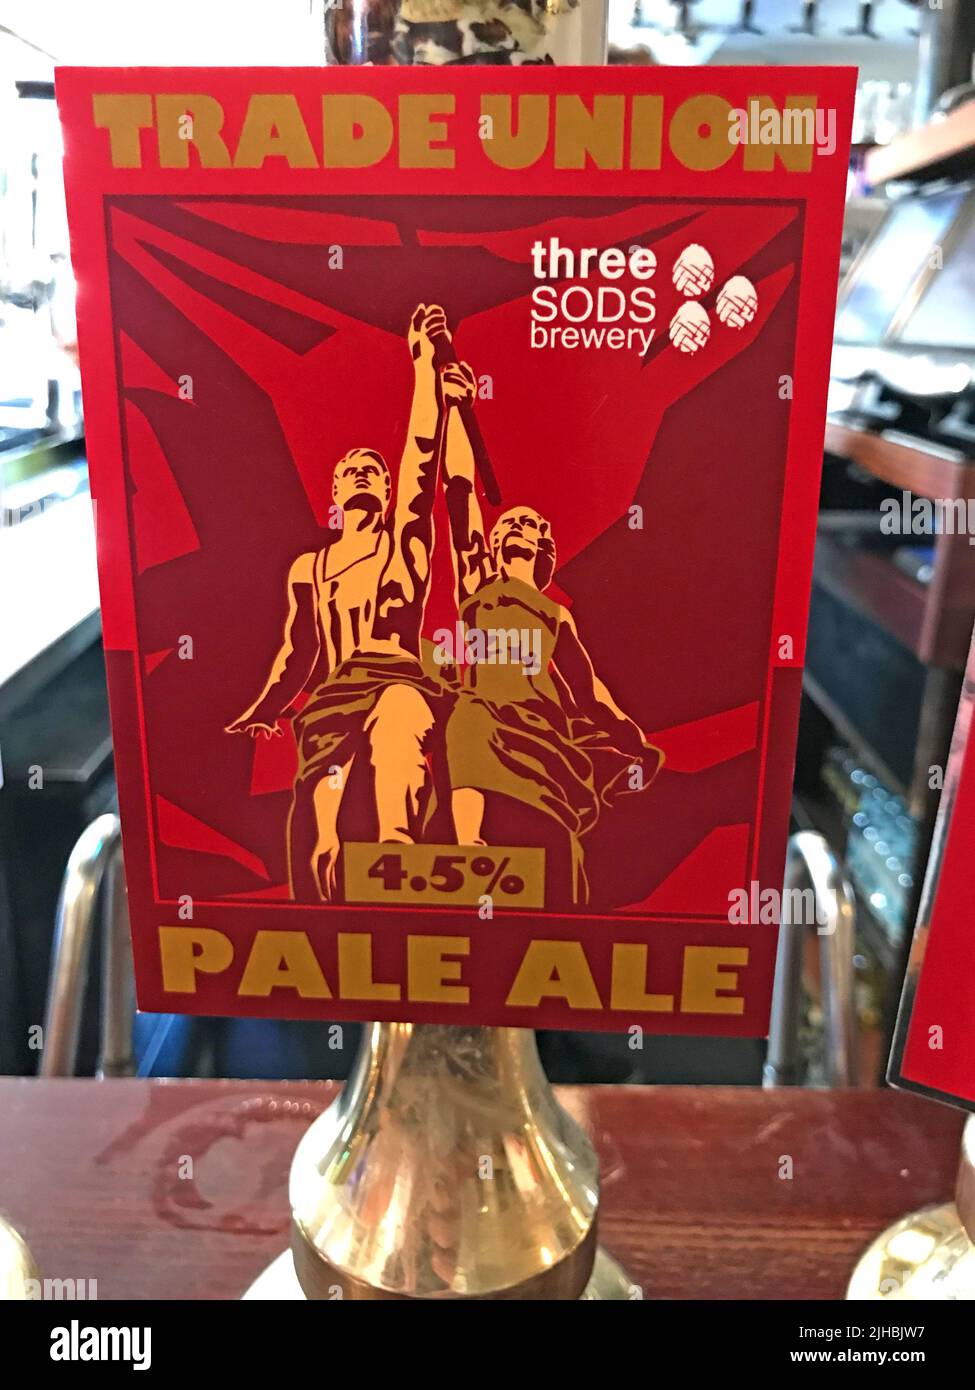 Trade Union Pale Ale, from three SODS brewery, handpull cask ale, ideal for striking workers, on the bar at the Kings Arms, Waterloo, London Stock Photo